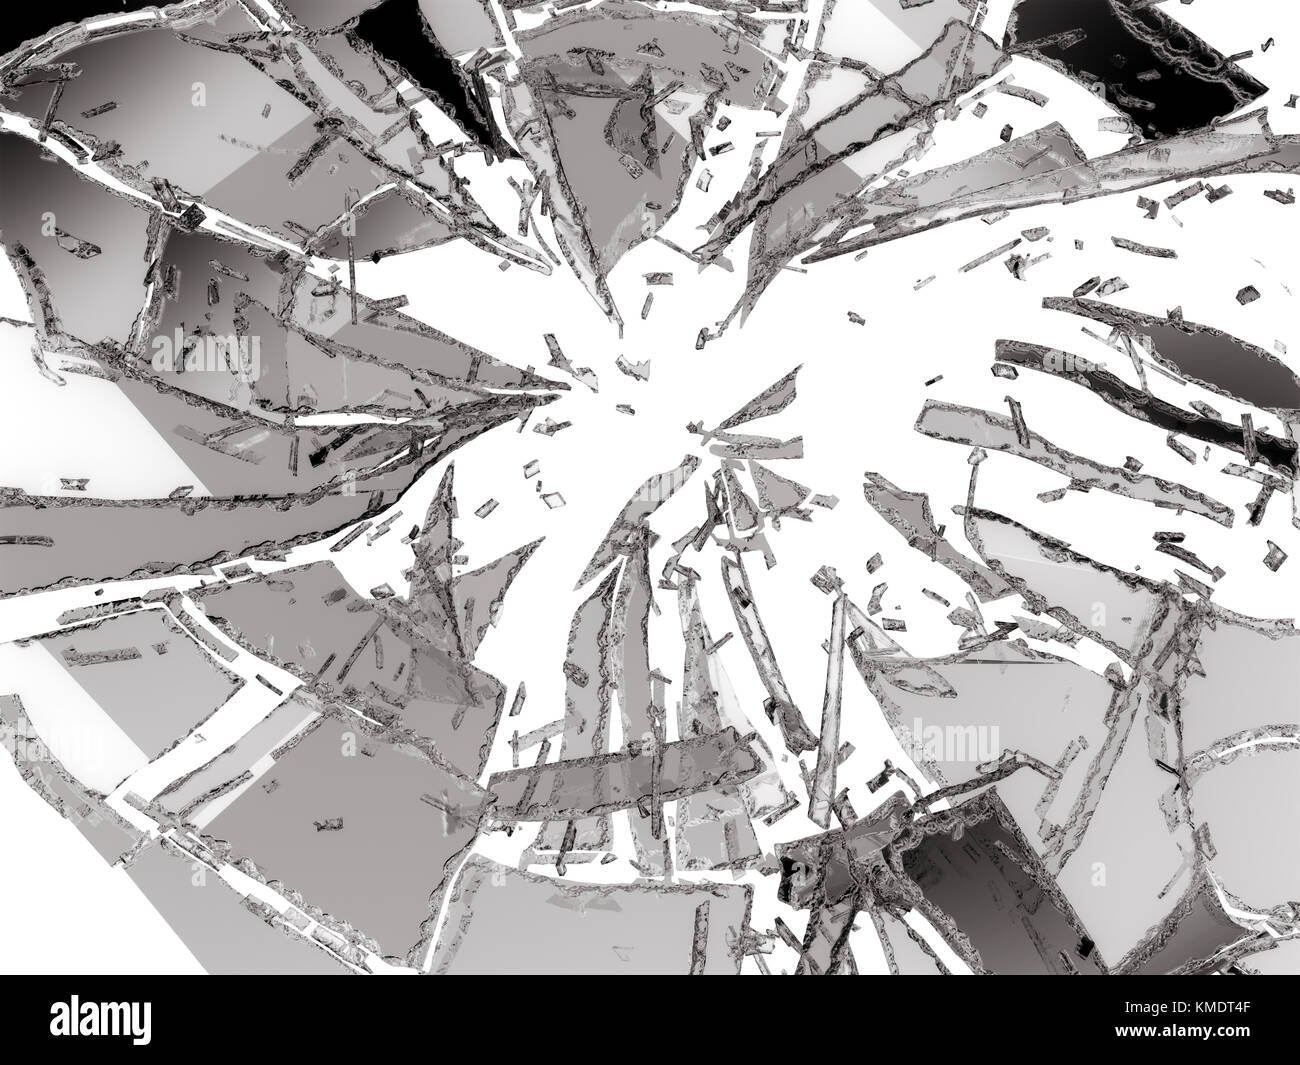 https://c8.alamy.com/comp/KMDT4F/shattered-or-broken-glass-pieces-isolated-on-white-background-KMDT4F.jpg